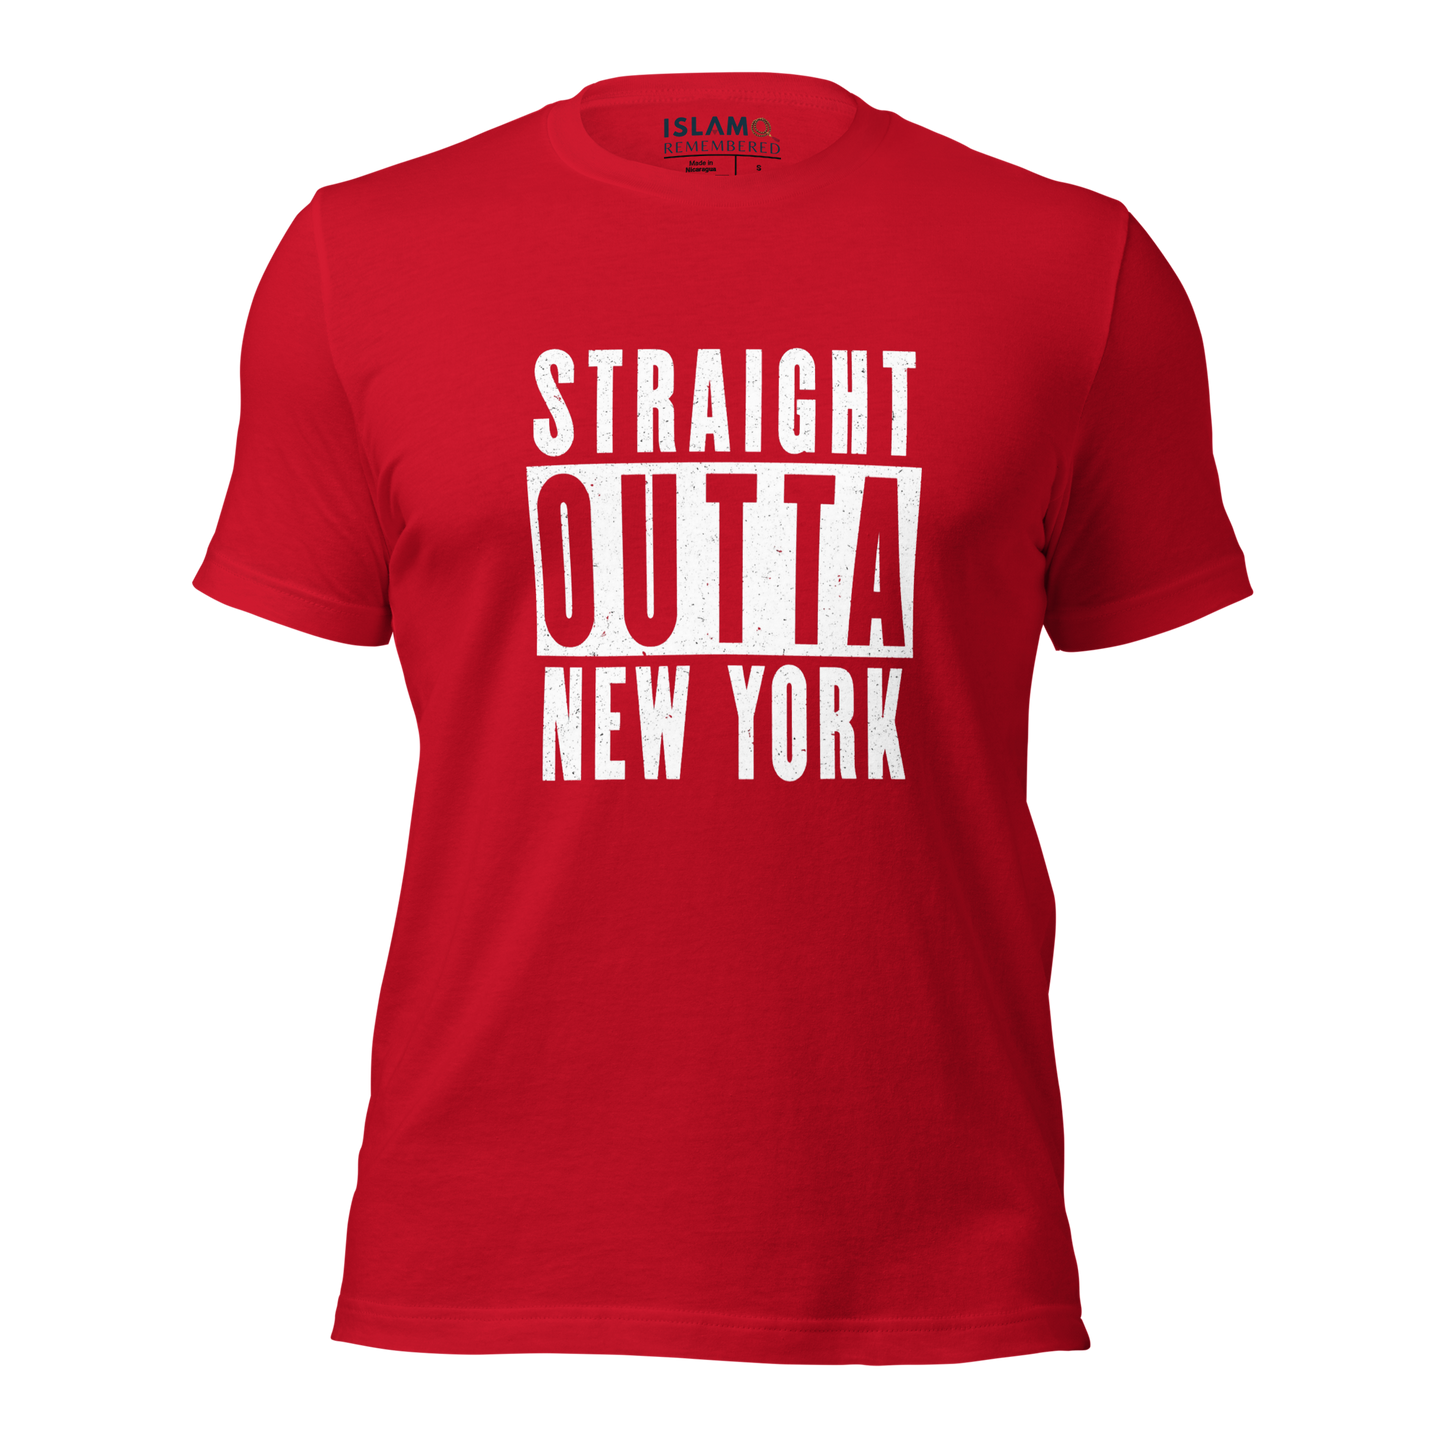 ADULT T-Shirt - STRAIGHT OUTTA NEW YORK